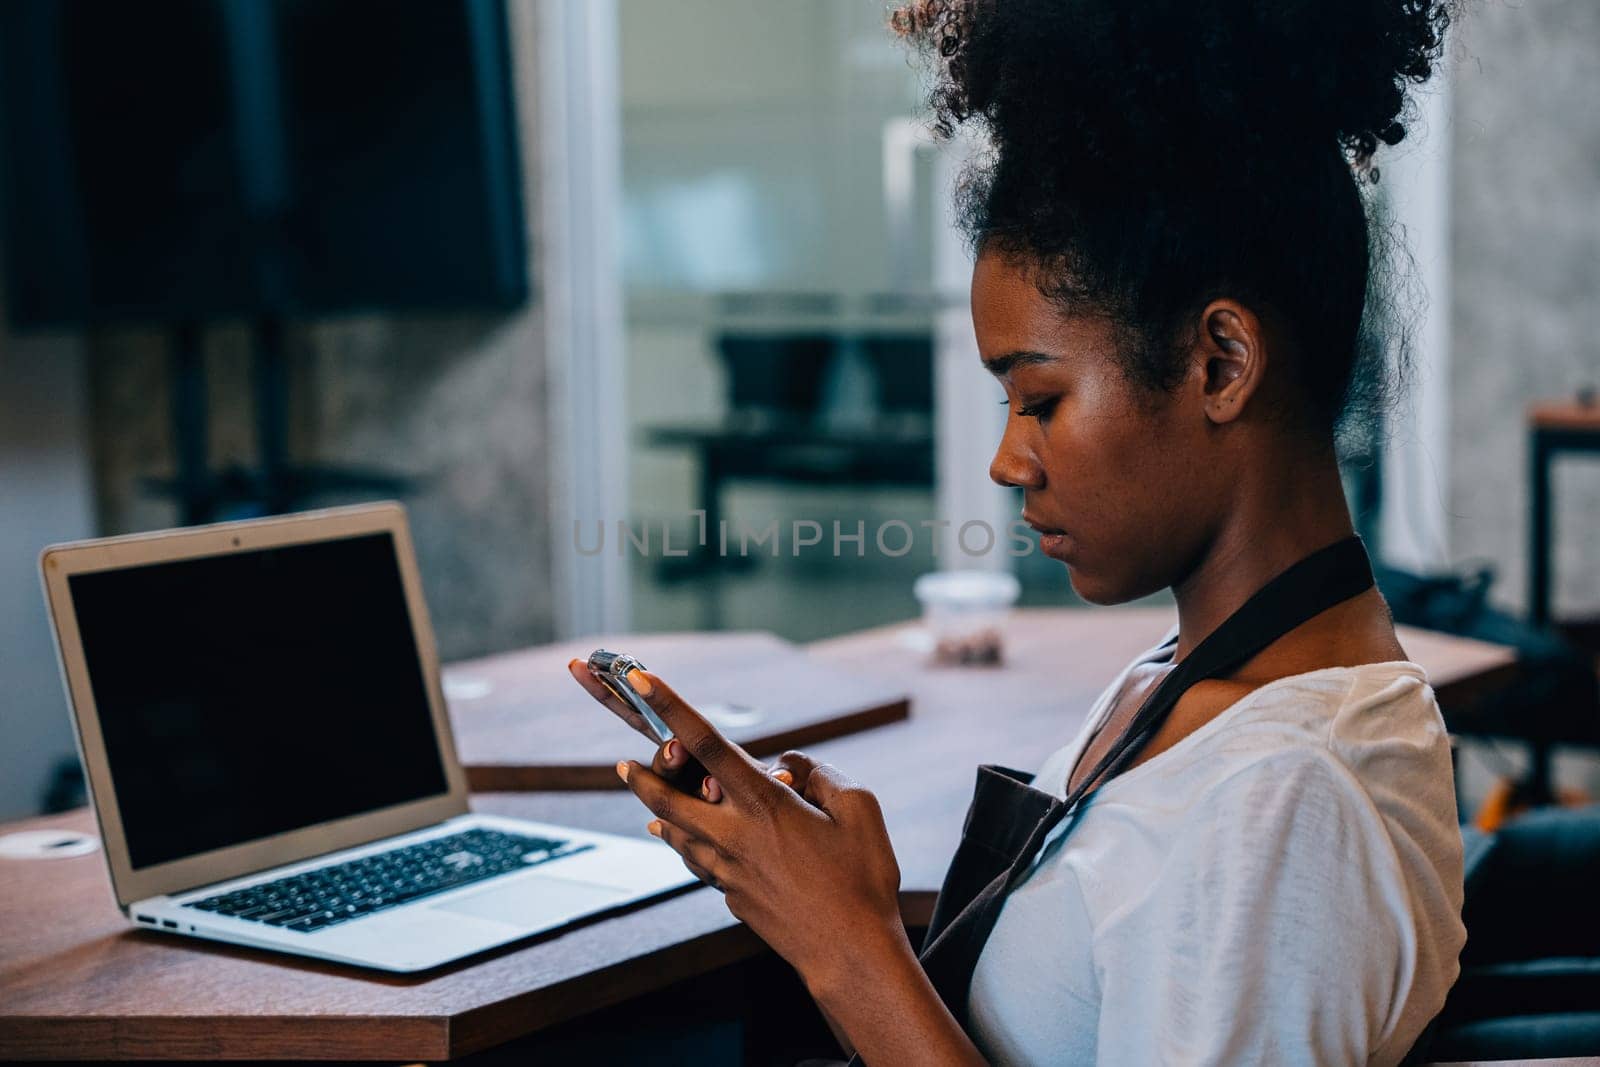 Close up portrait of focused black woman coffee shop owner in apron using smartphone in her cafe. Multi tasking barista manages orders communicates runs her own business.